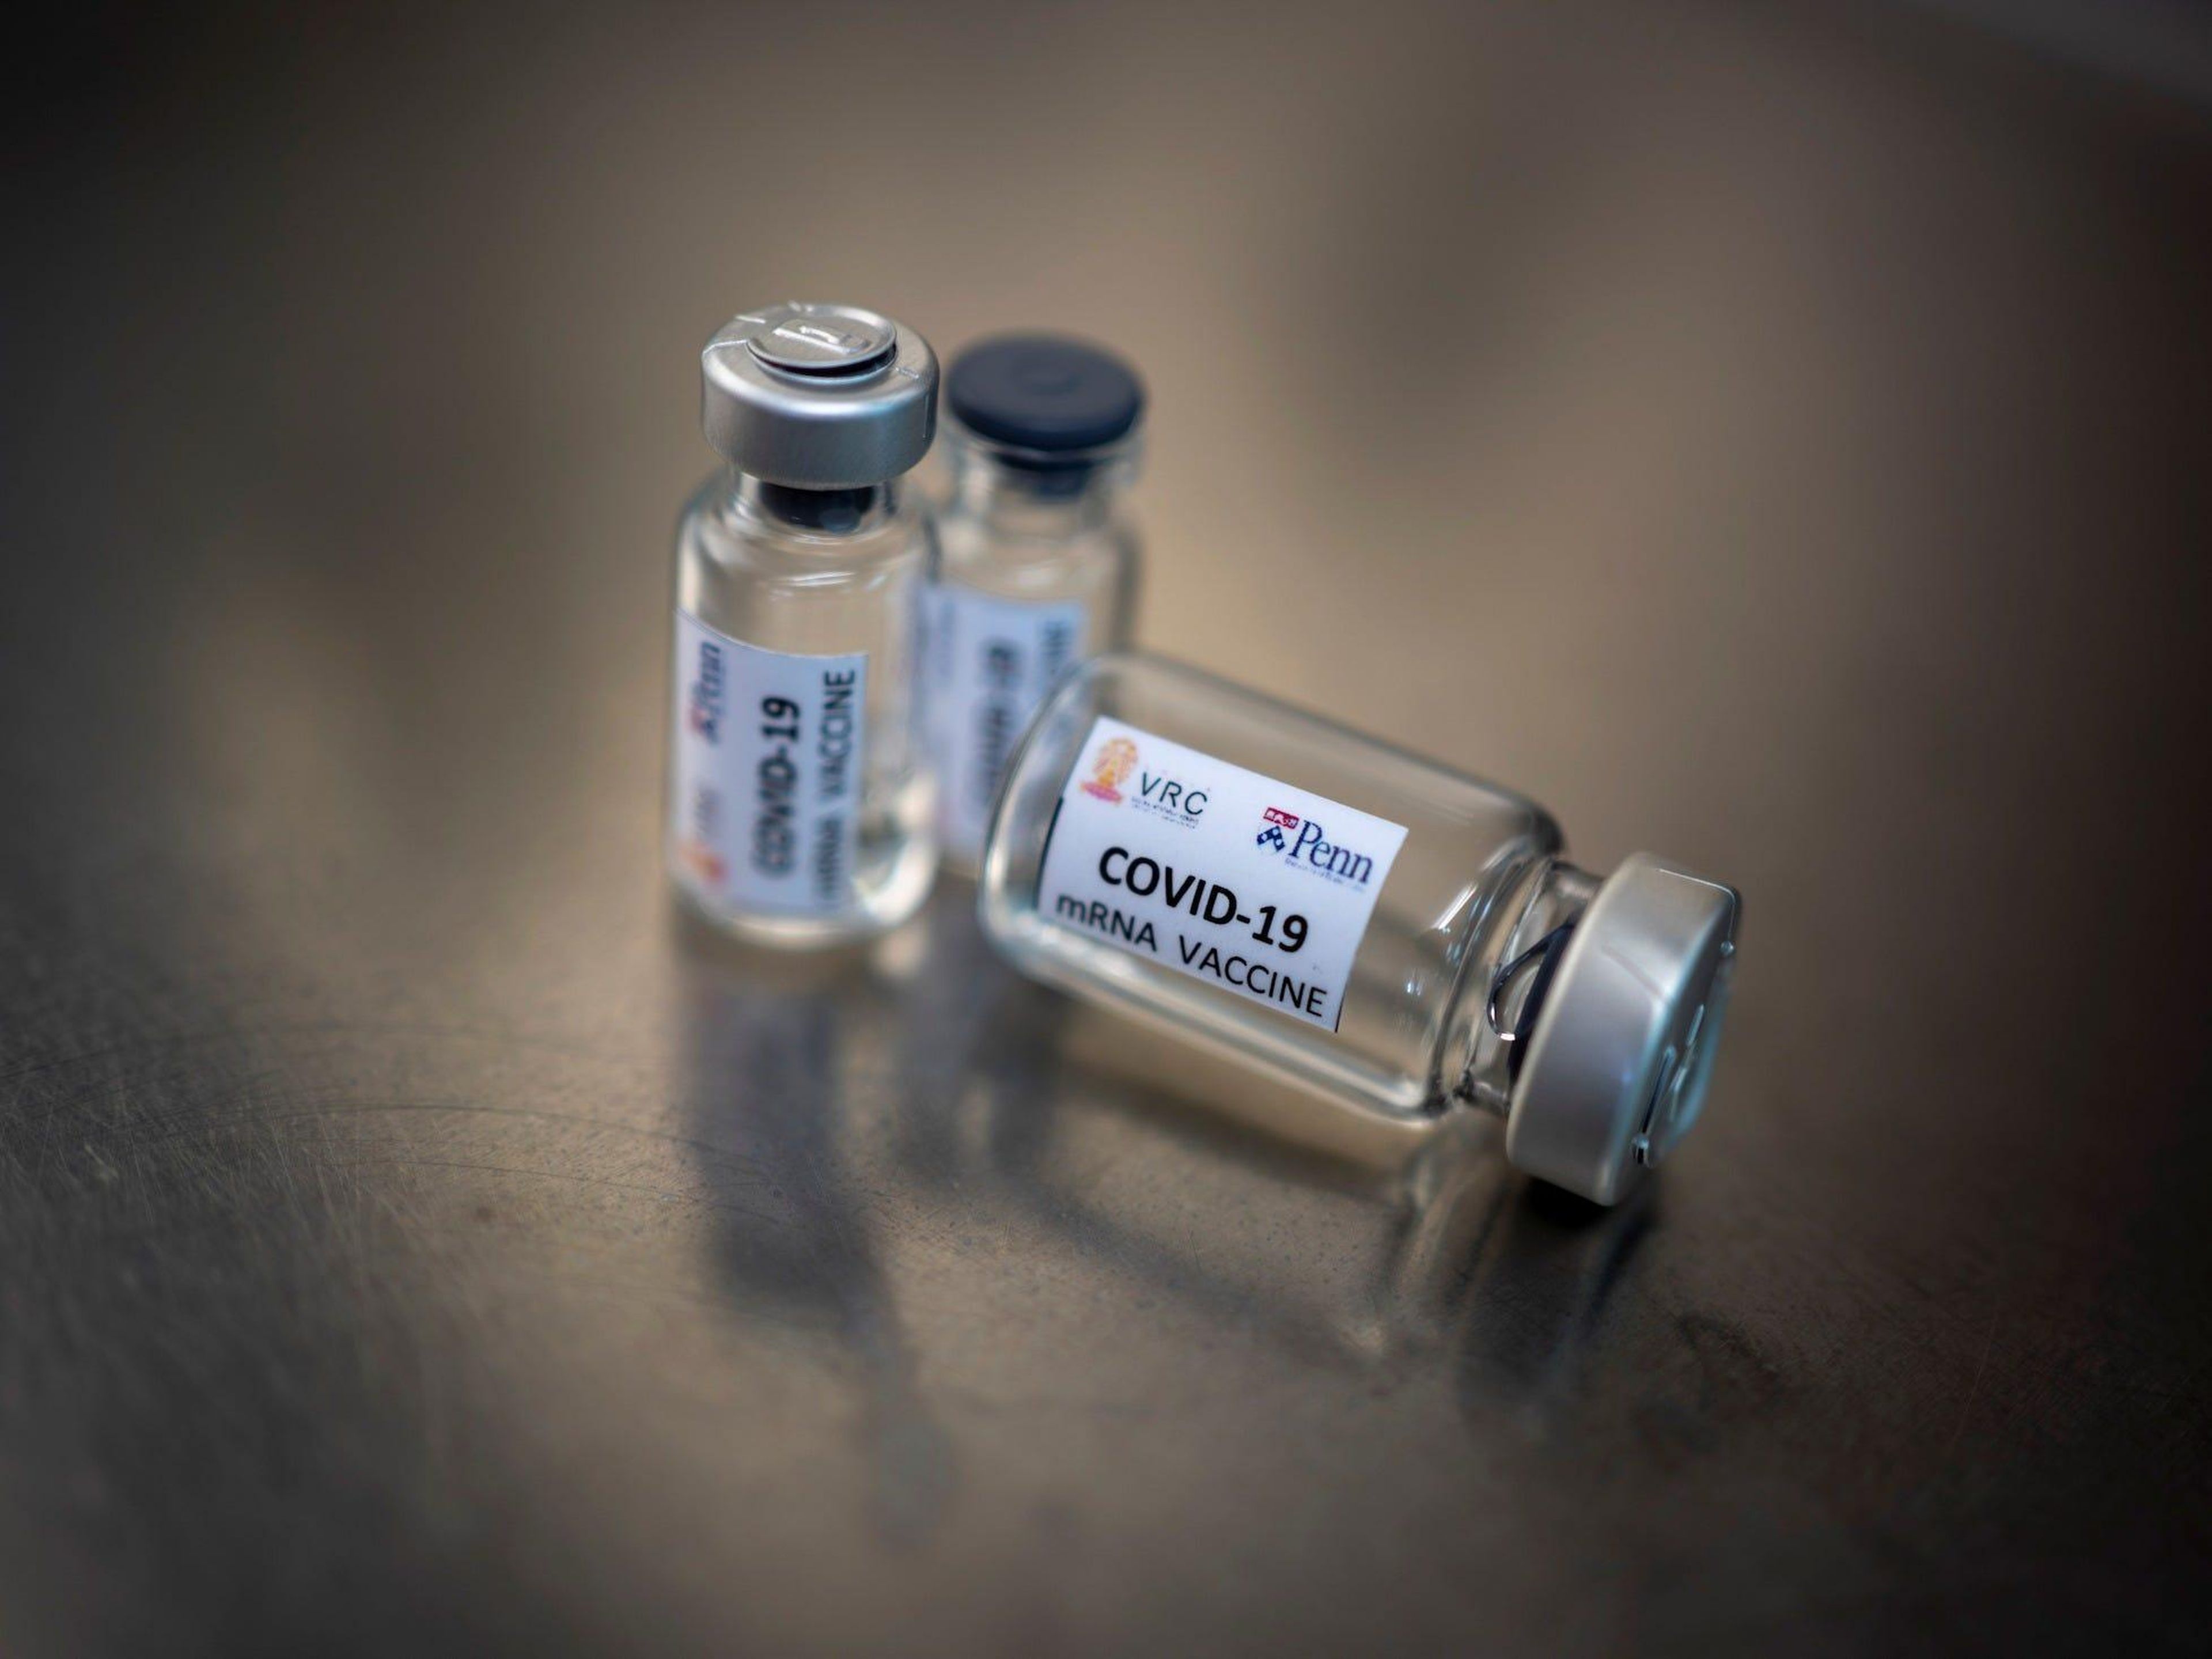 Vials of an mRNA type vaccine candidate being developed for the coronavirus at Chulalongkorn University in Bangkok, Thailand, May 25, 2020.